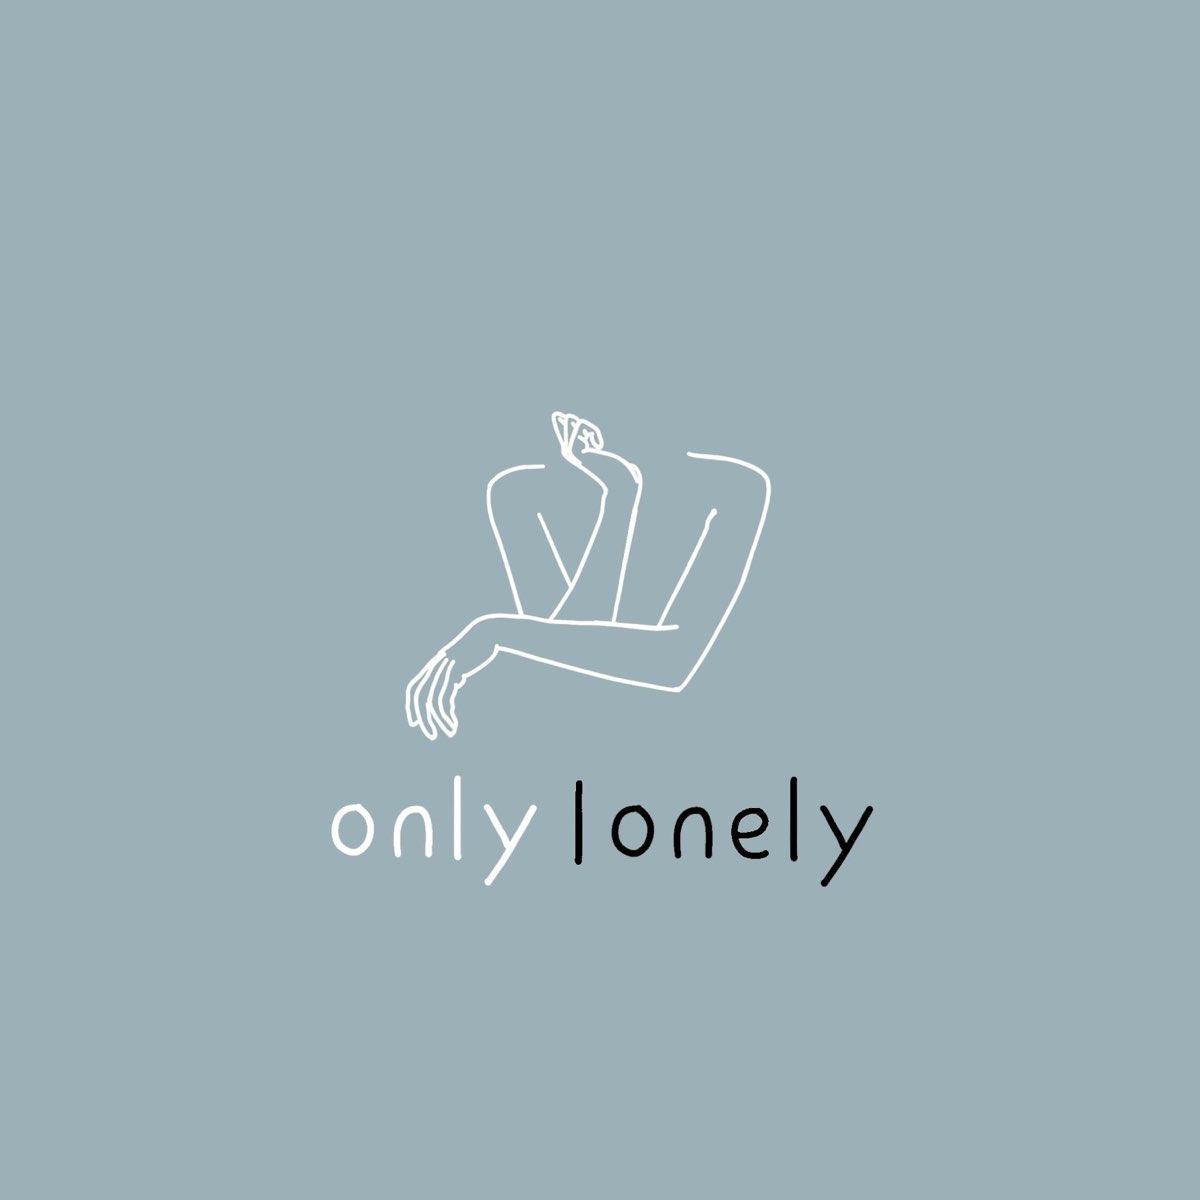 Single only Lonely Alone разница. Lonely only. Lonely logo. Песня Онли Лонли. Only the lonely